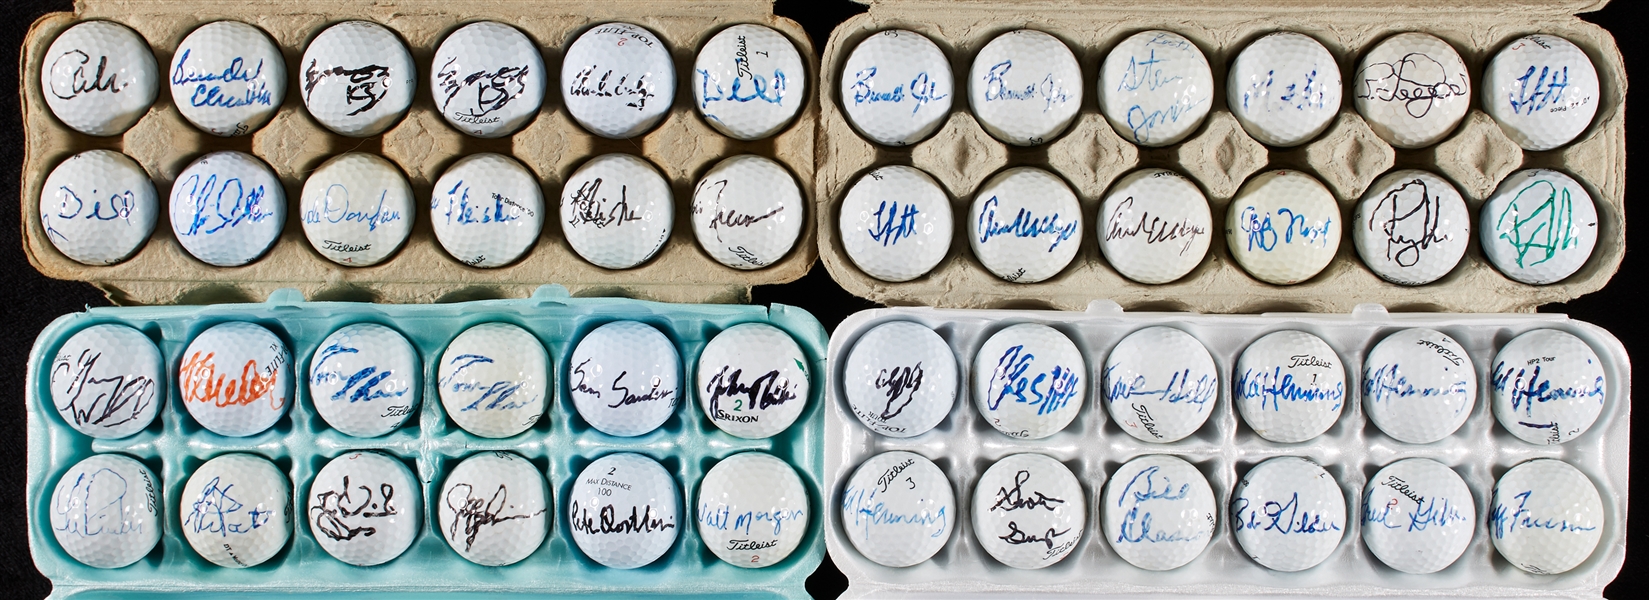 Golf Signature Collection with Photos, Balls, Cuts, Flags (355)